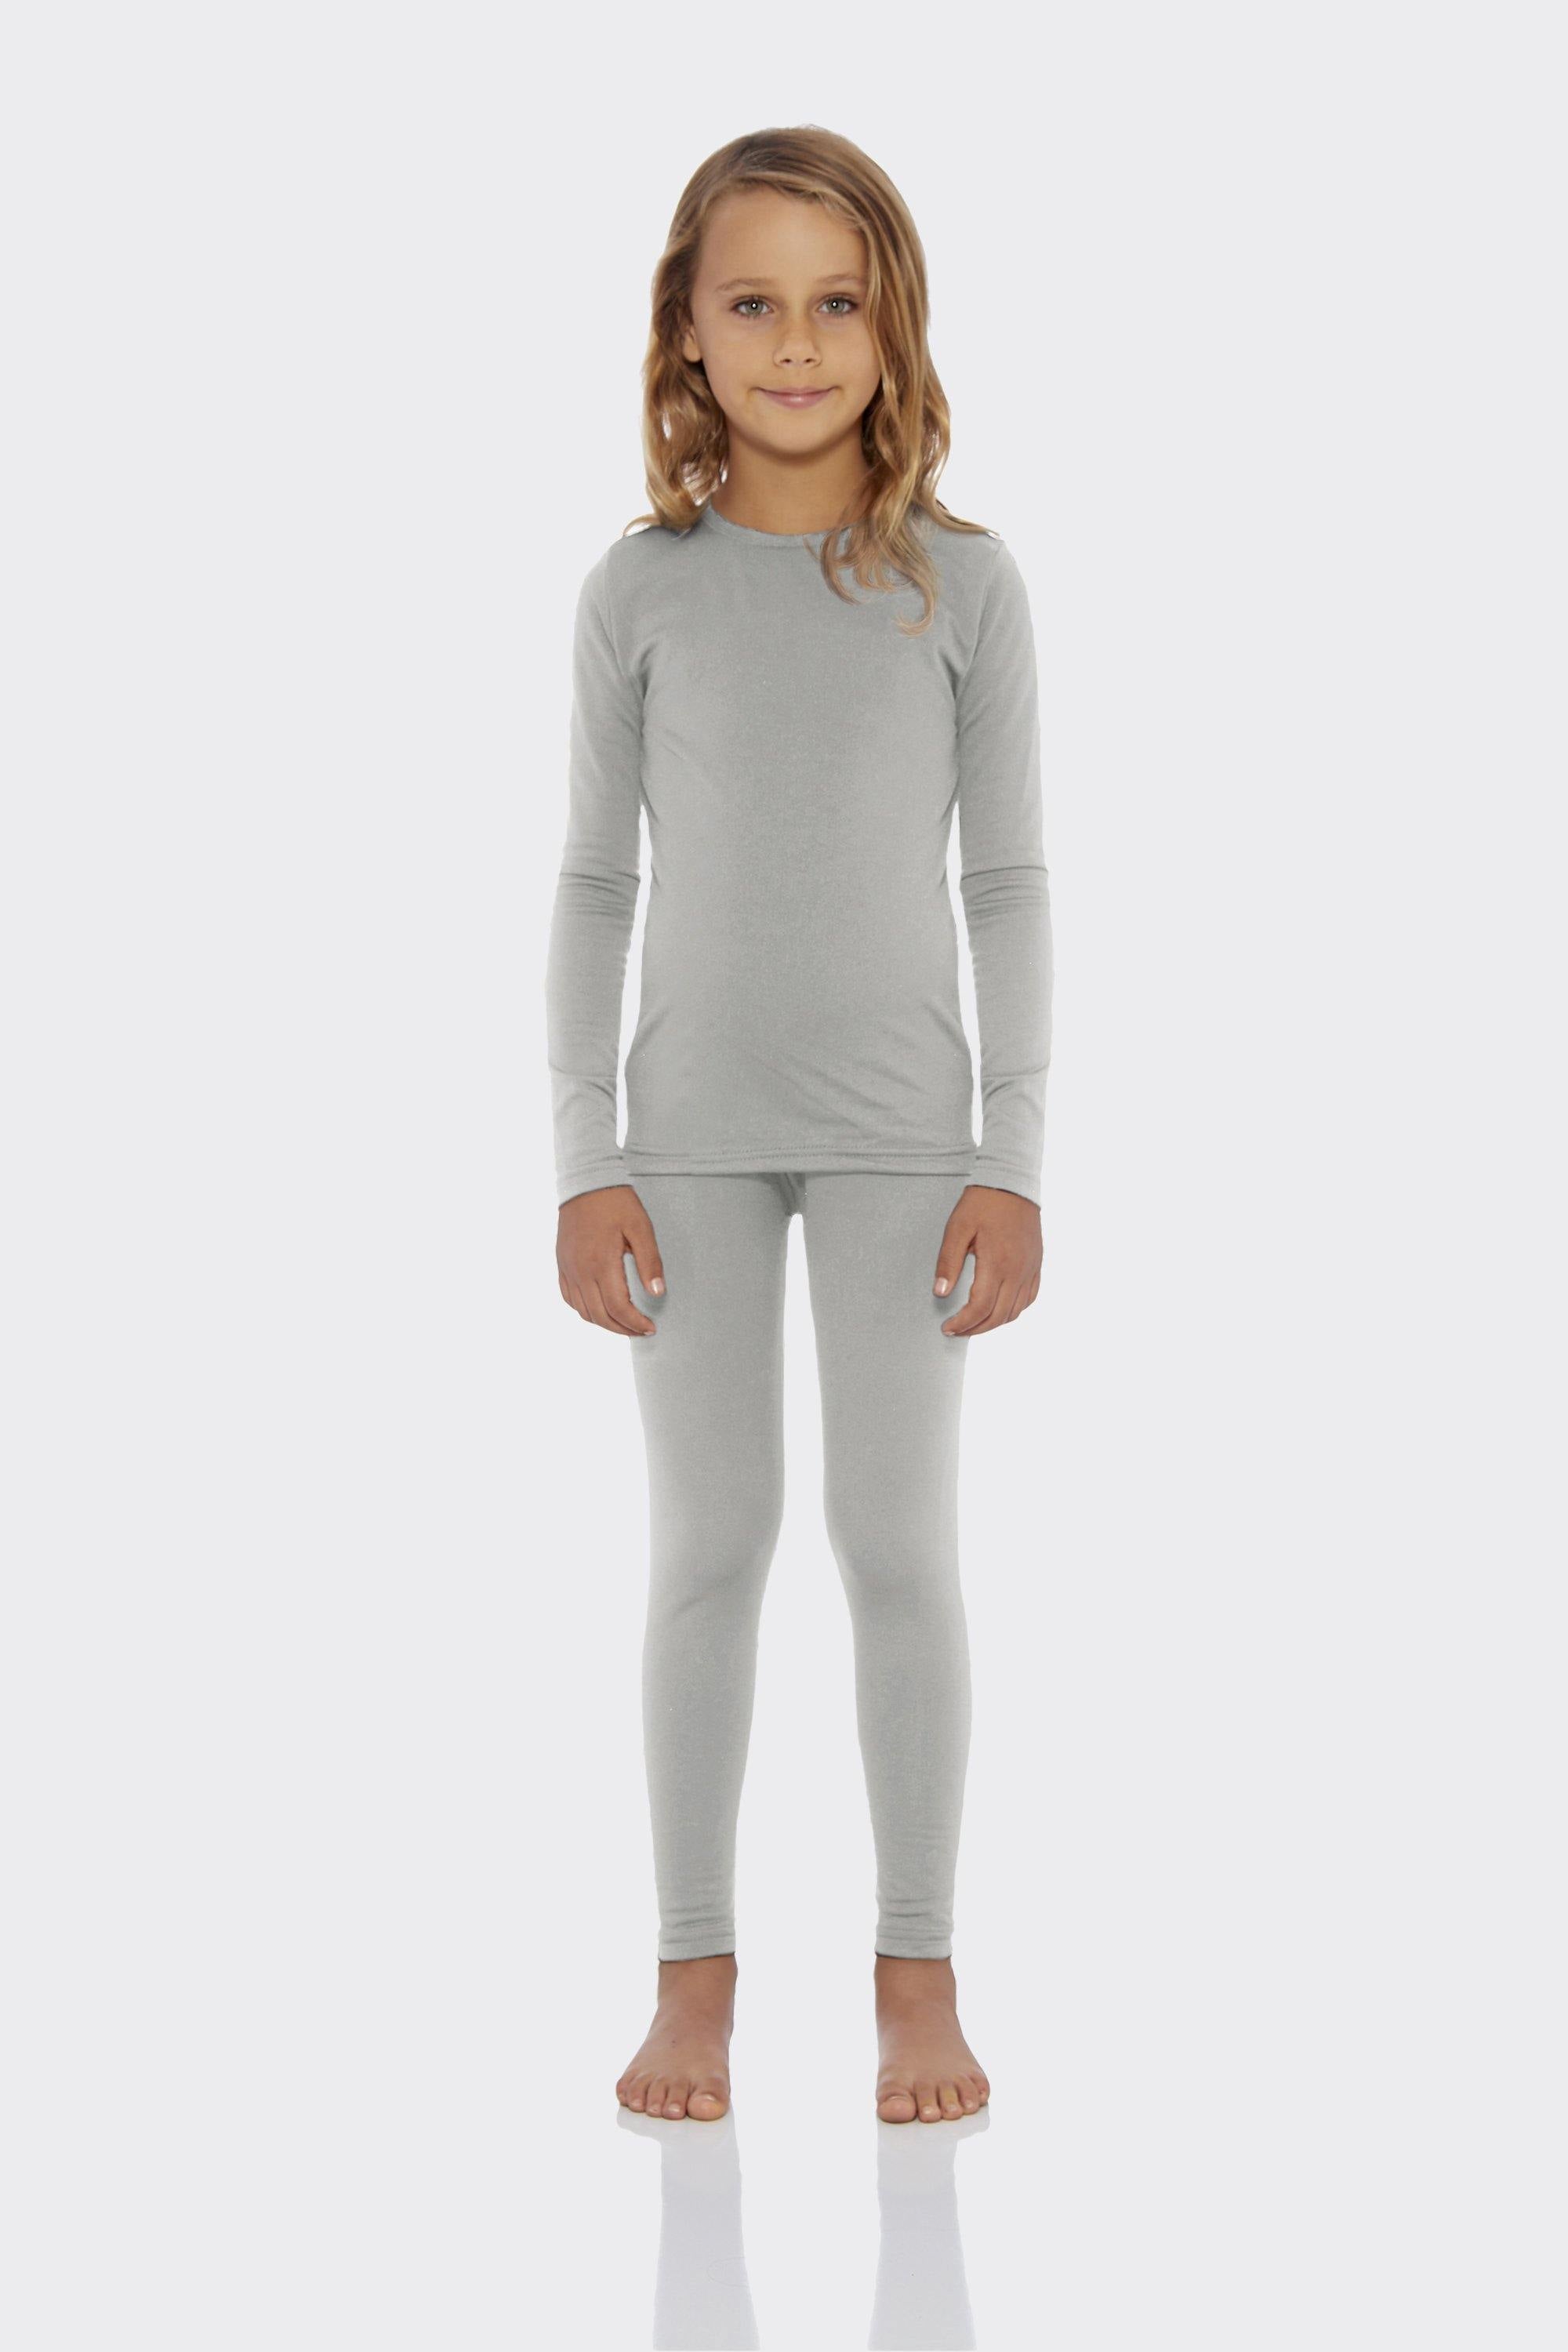 Buy Rocky Thermal Underwear for Girls Fleece Lined Thermals Kids Base Layer  Long John Set at